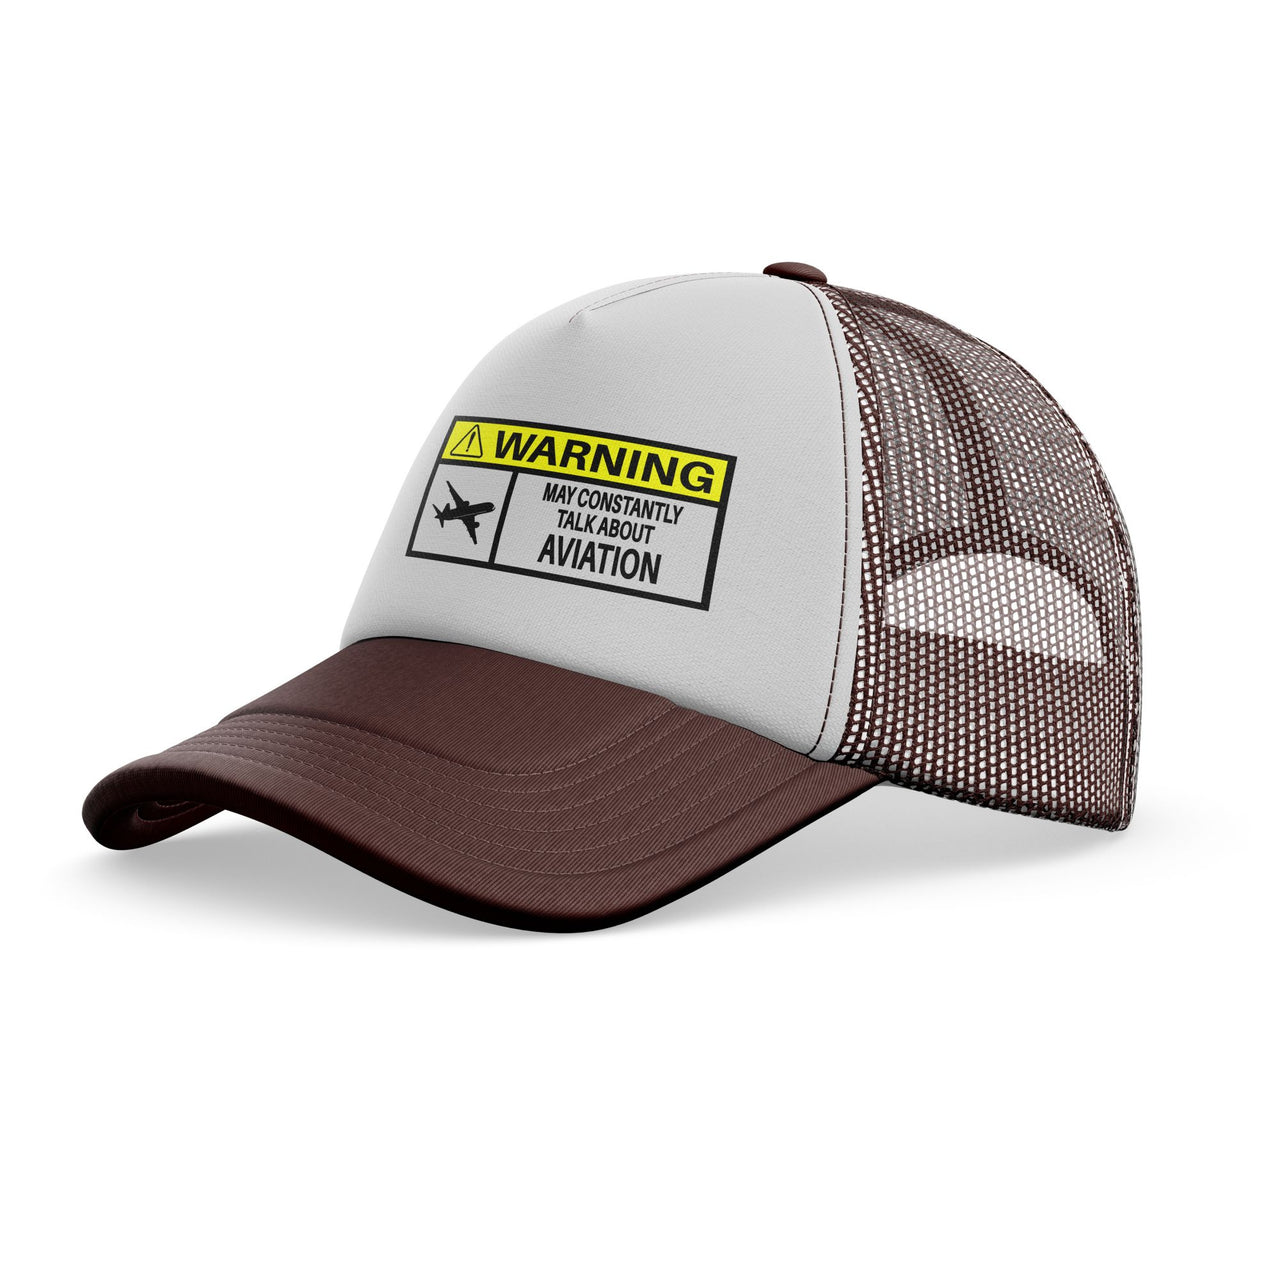 Warning May Constantly Talk About Aviation Designed Trucker Caps & Hats